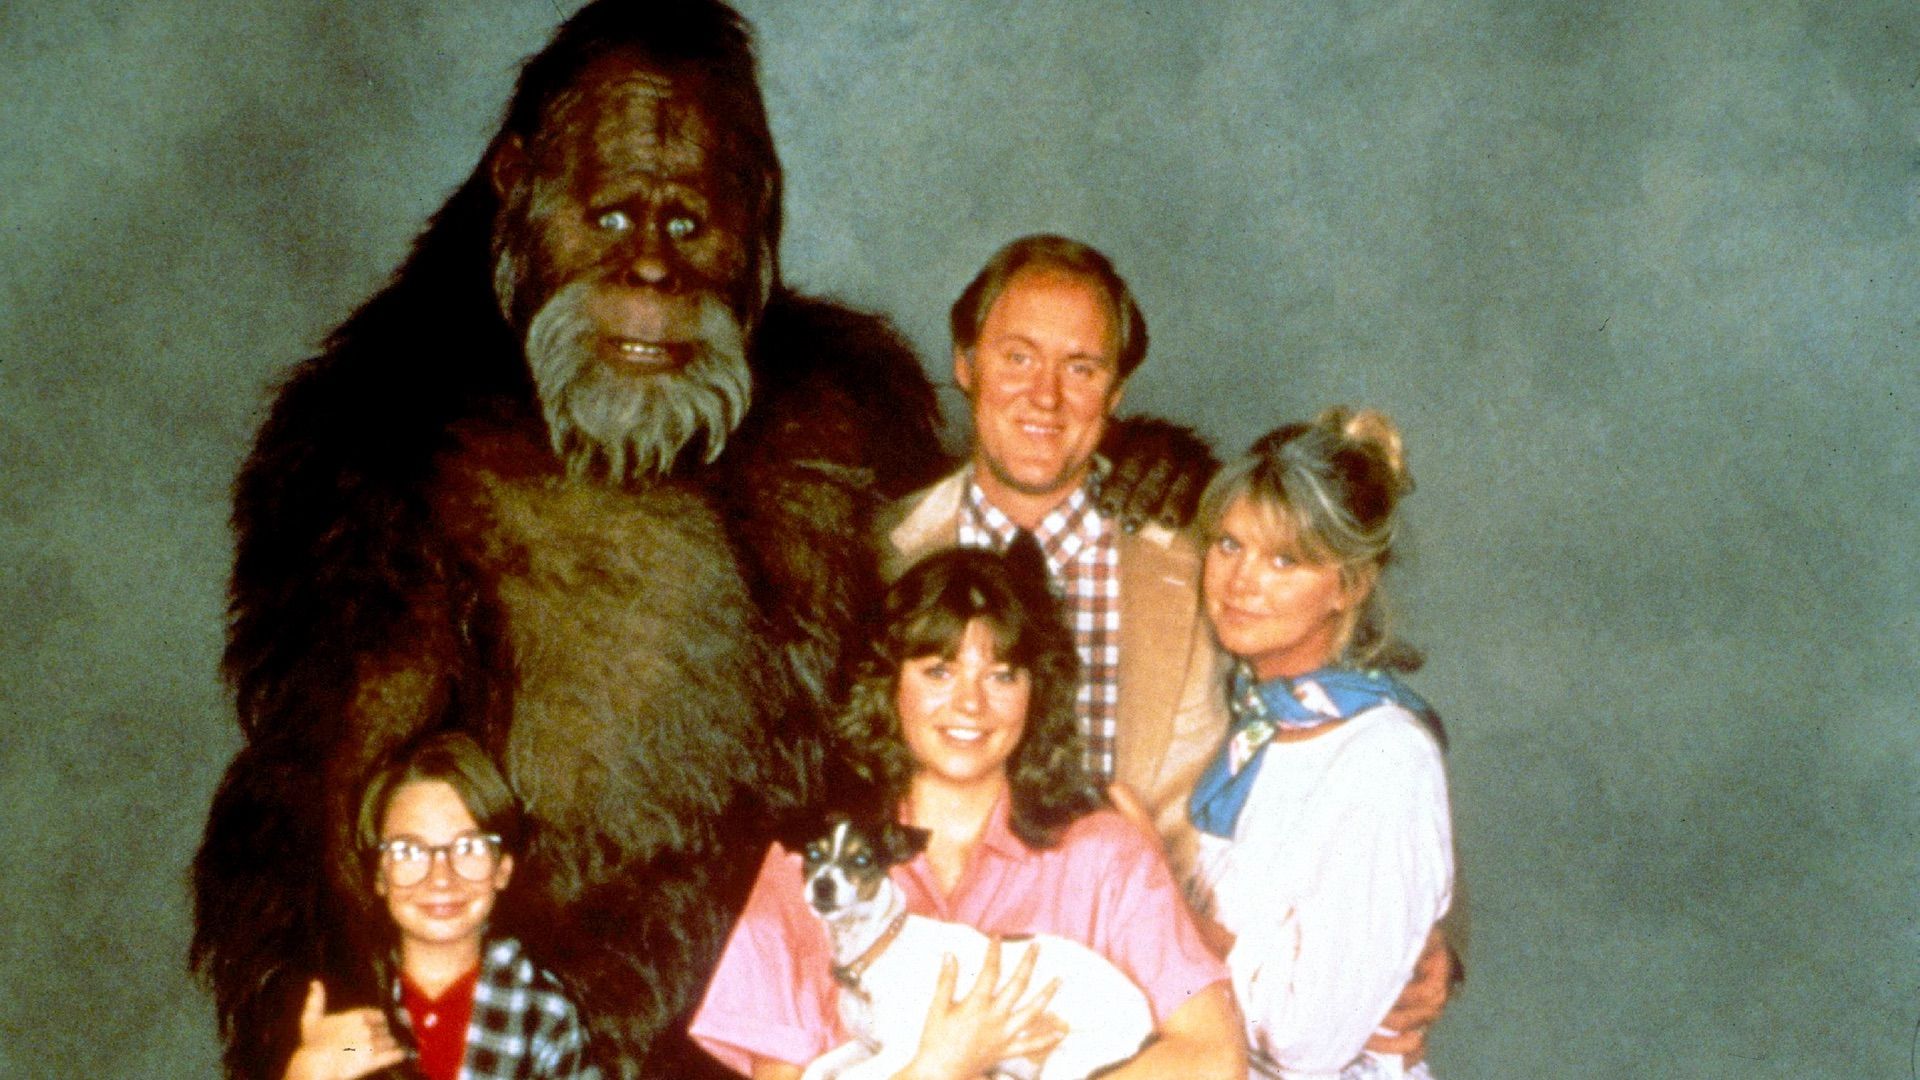 Harry and the Hendersons Backdrop